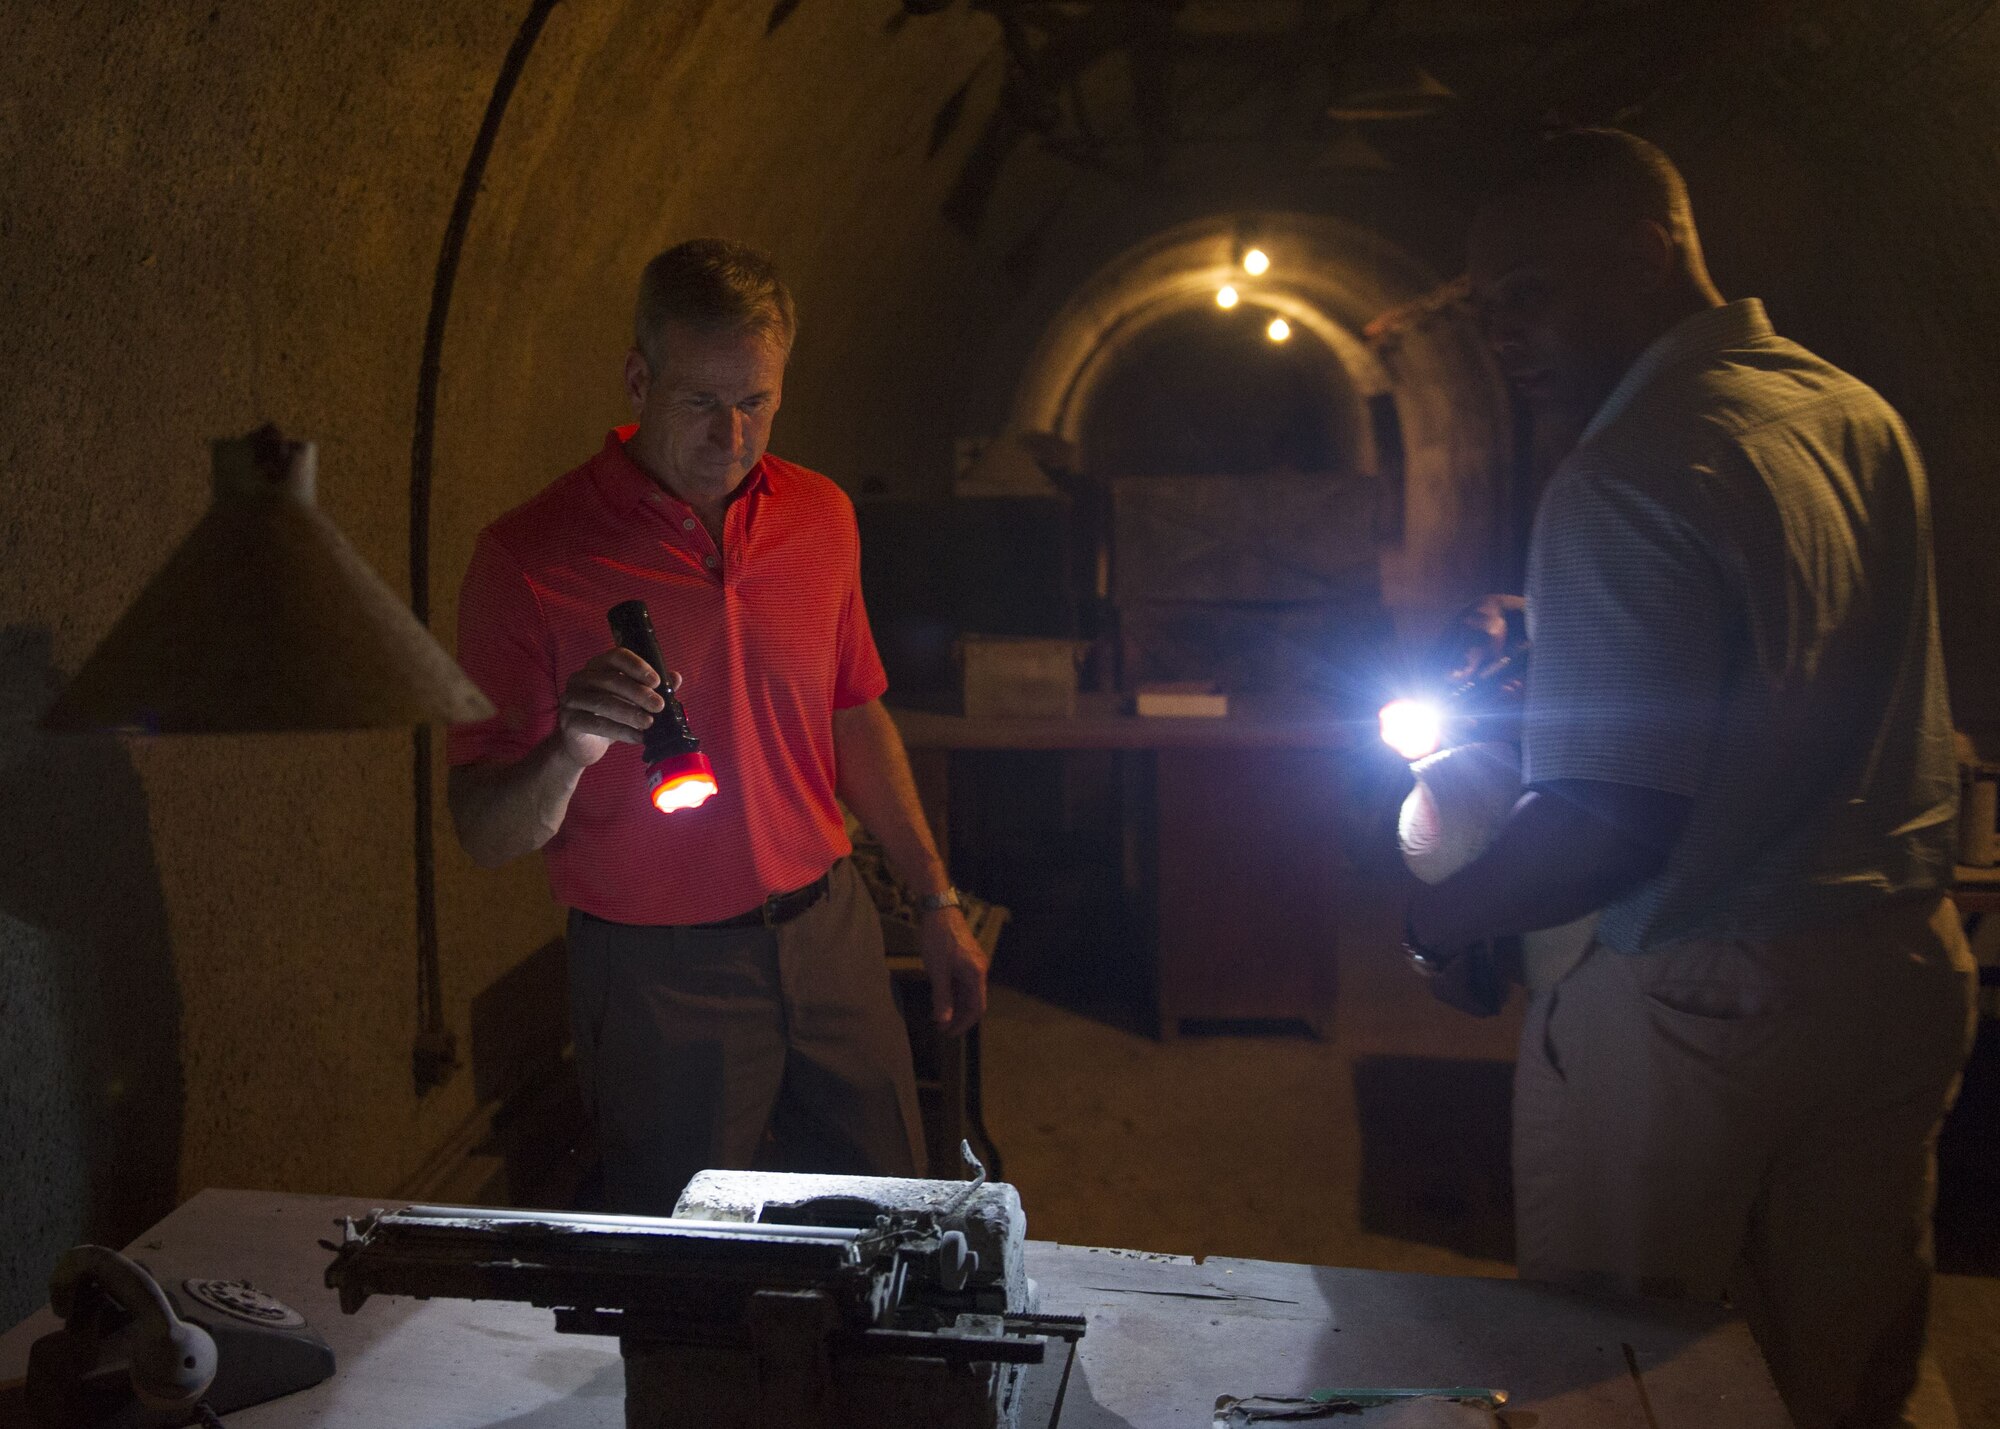 Gen. Terrence J. O’Shaughnessy, Pacific Air Forces commander and Chief Master Sgt. Anthony Johnson, PACAF command chief, examine a typewriter in a bunker on Corregidor Island, Philippines, during a historic tour of the island Dec. 10.